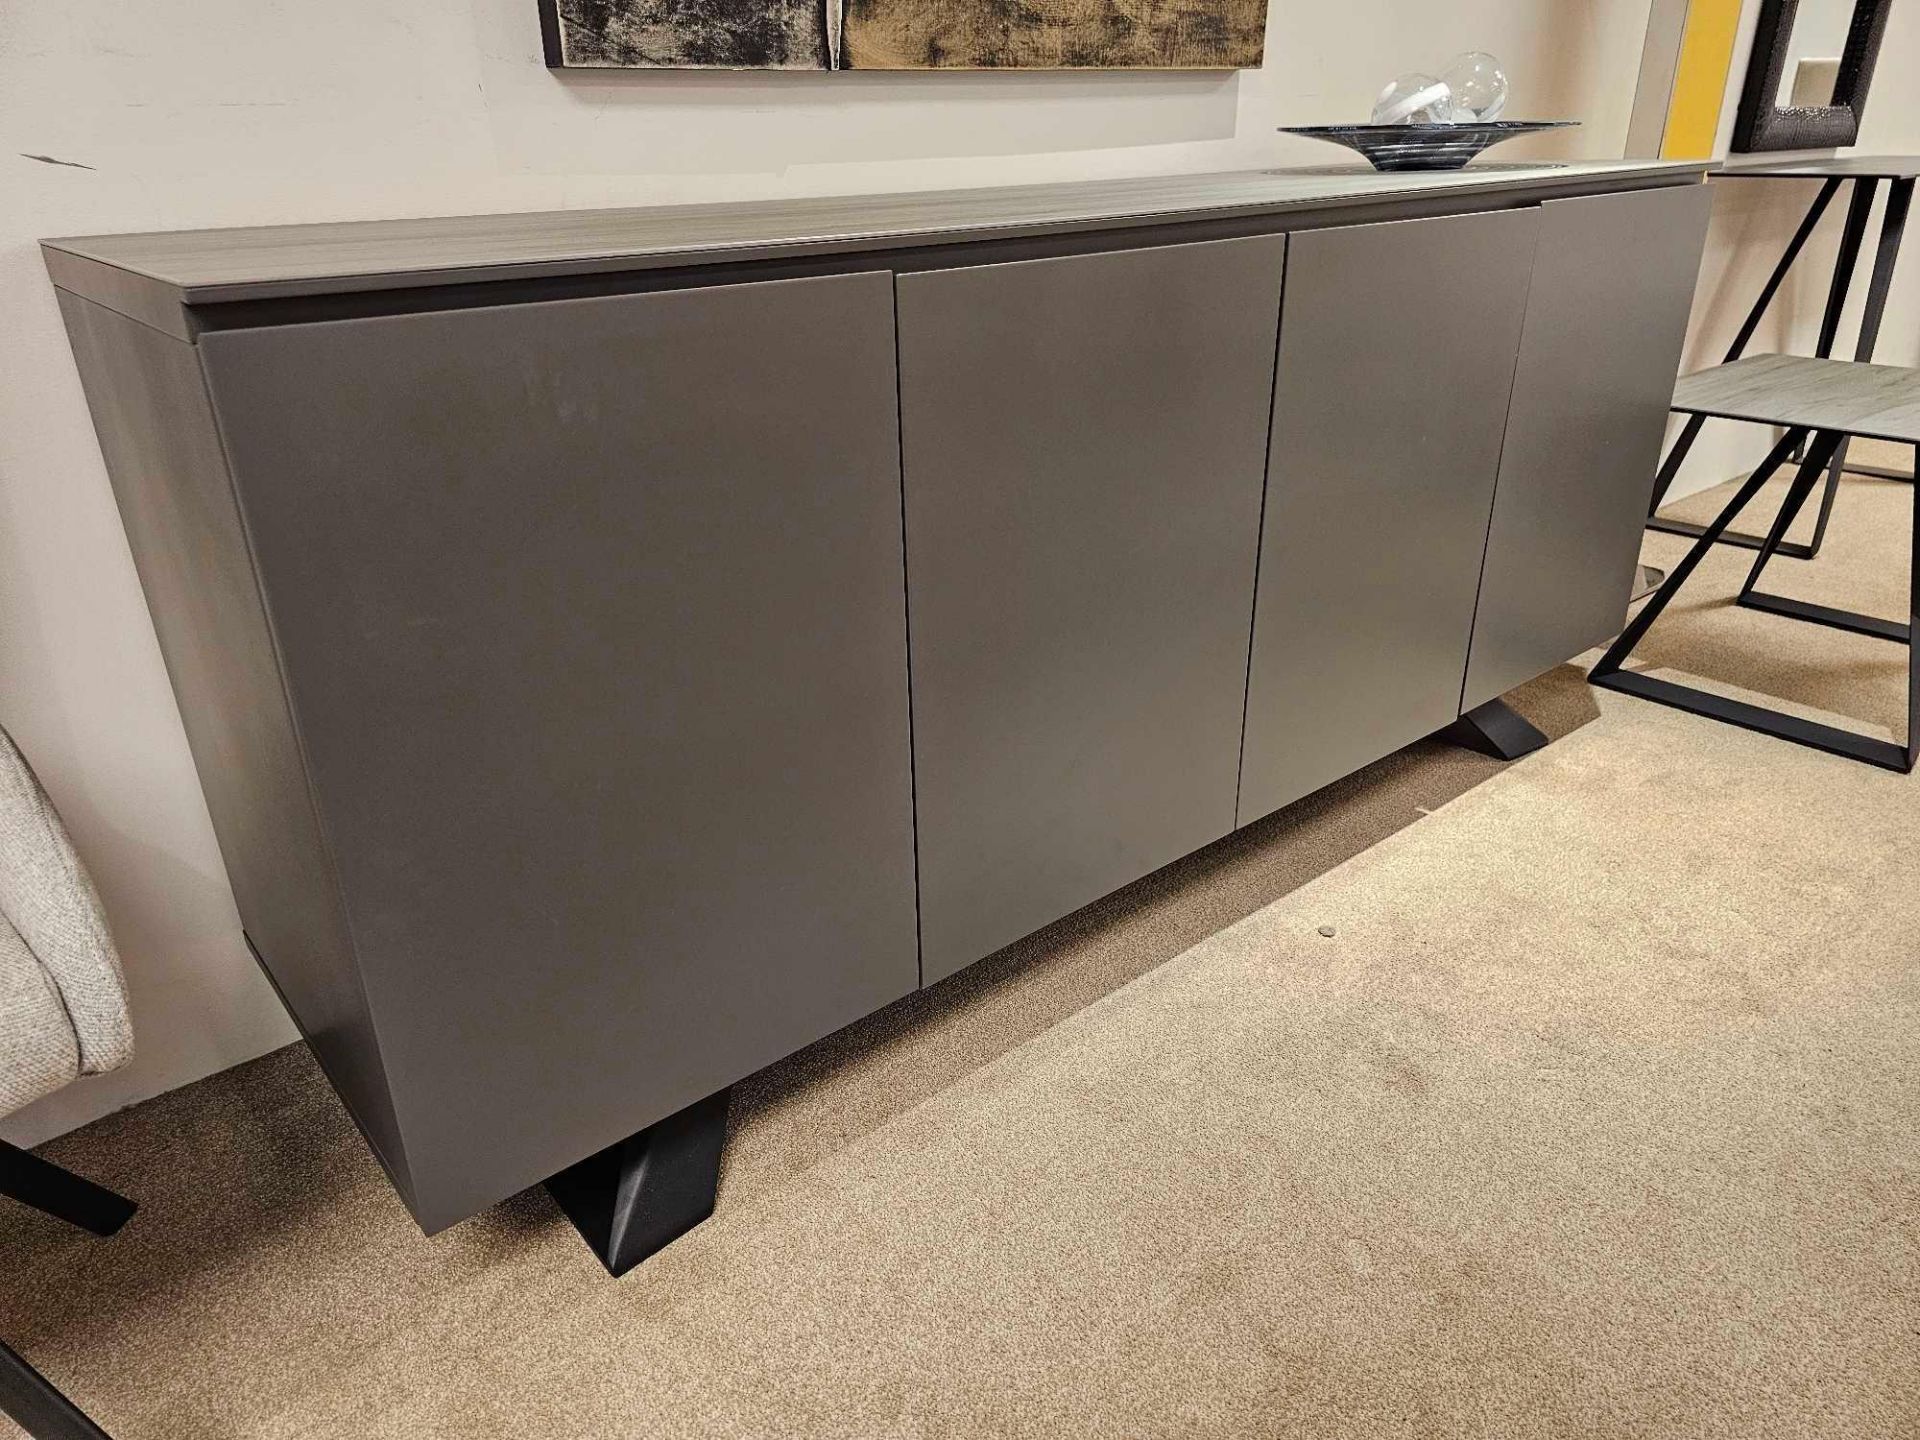 Spartan Sideboard by Kesterport The Spartan Four Door Sideboard provides is striking as a stand - Image 2 of 12